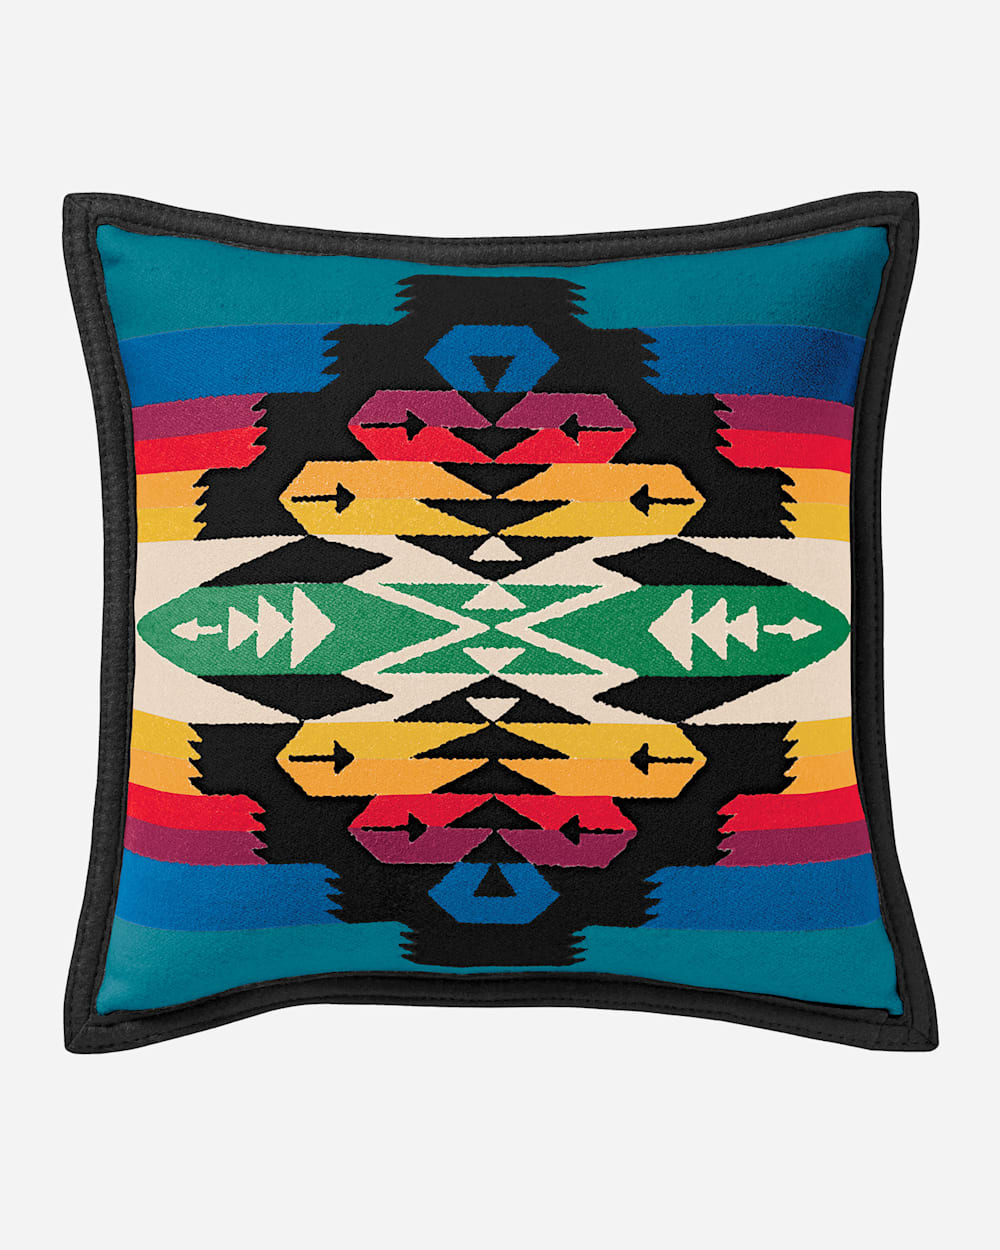 ADDITIONAL VIEW OF TUCSON PILLOW IN BLACK image number 2